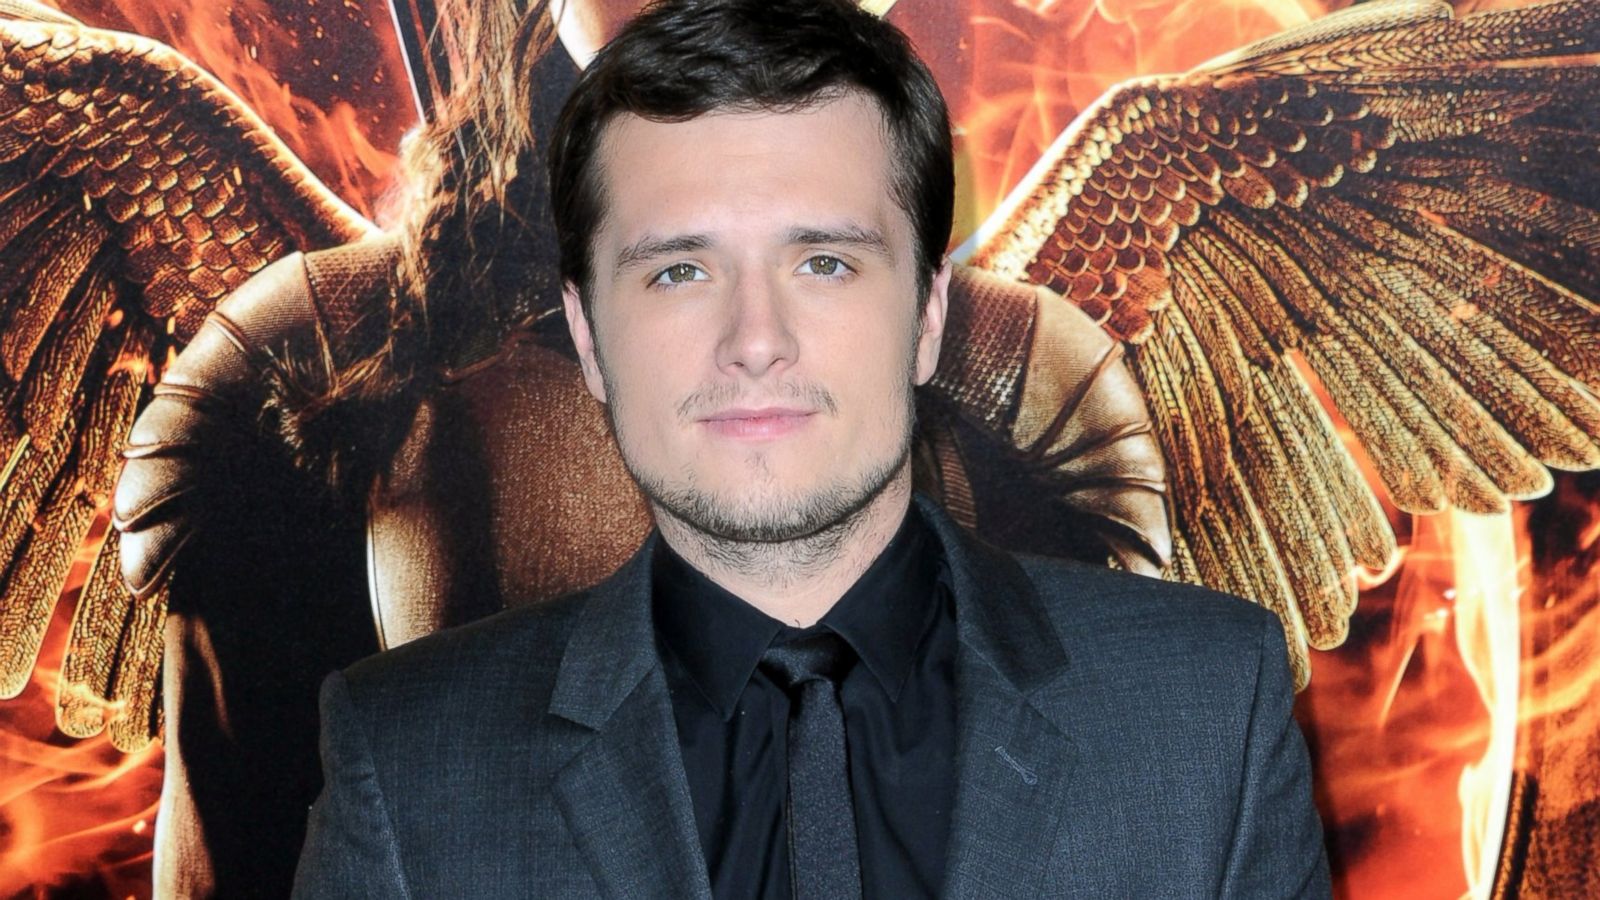 josh hutcherson younger brother